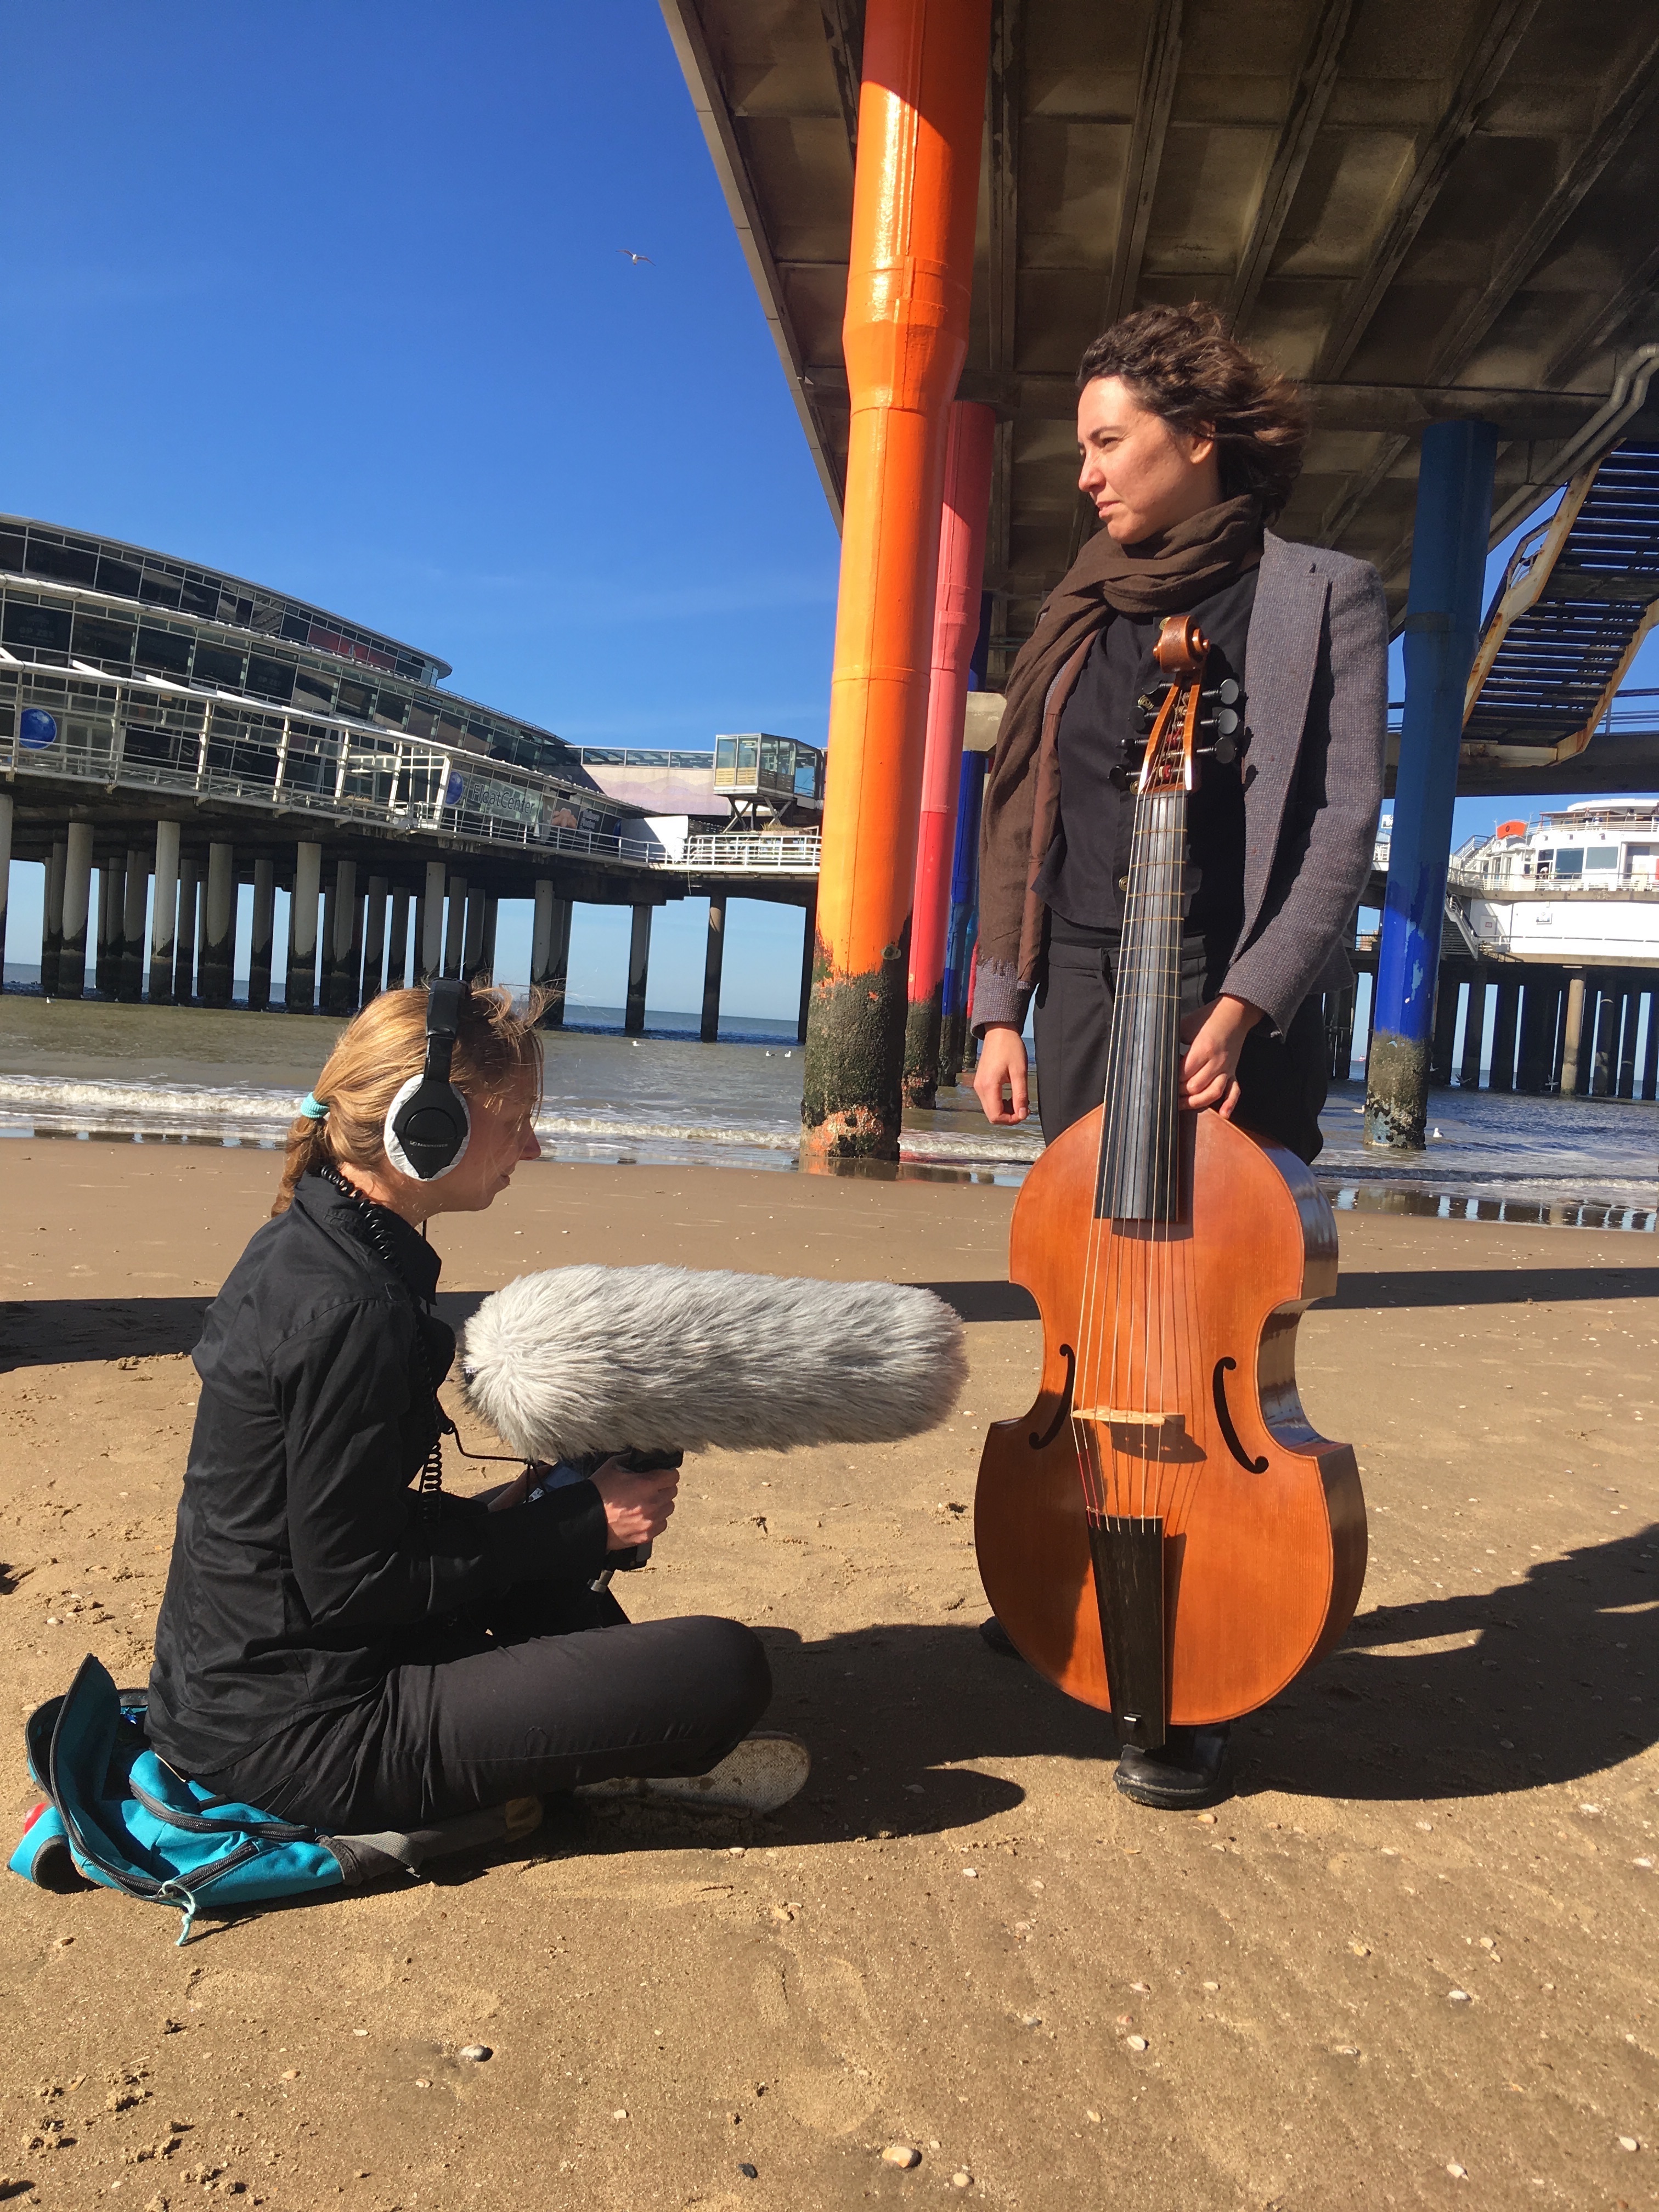 Leonie Roessler and Rebecca Lefèvre recording at the beach